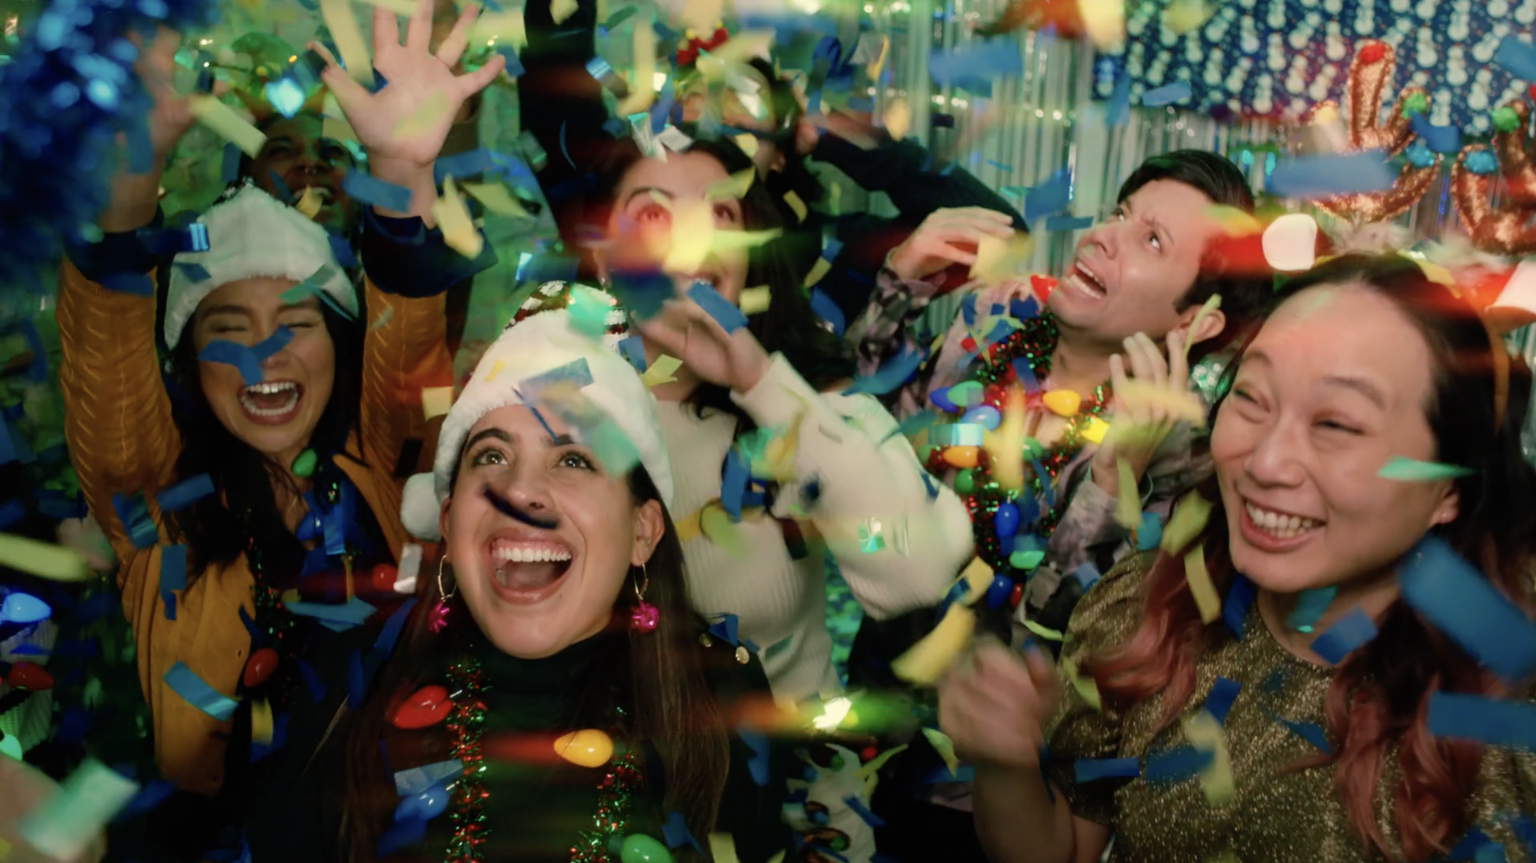 Office party-goers dancing with confetti and holiday decor